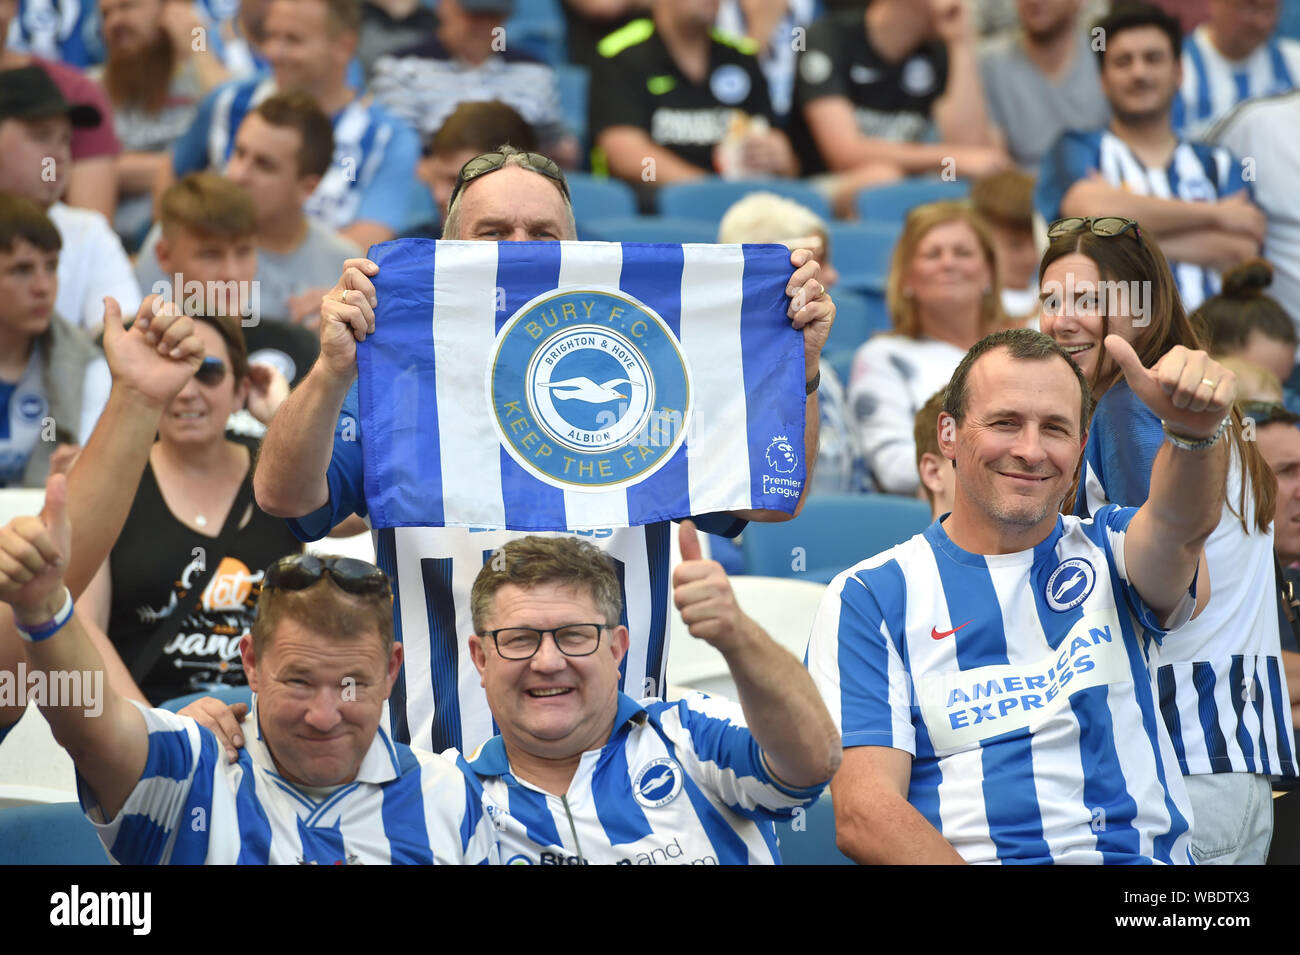 Brighton fans support Bury FC in their fight to remain in the league during the Premier League match between Brighton and Hove Albion and Southampton at the American Express Community Stadium , Brighton , 24 August 2019 Bury are on the verge of going out of the EFL unless a buyer can be found . Editorial use only. No merchandising. For Football images FA and Premier League restrictions apply inc. no internet/mobile usage without FAPL license - for details contact Football Dataco Stock Photo